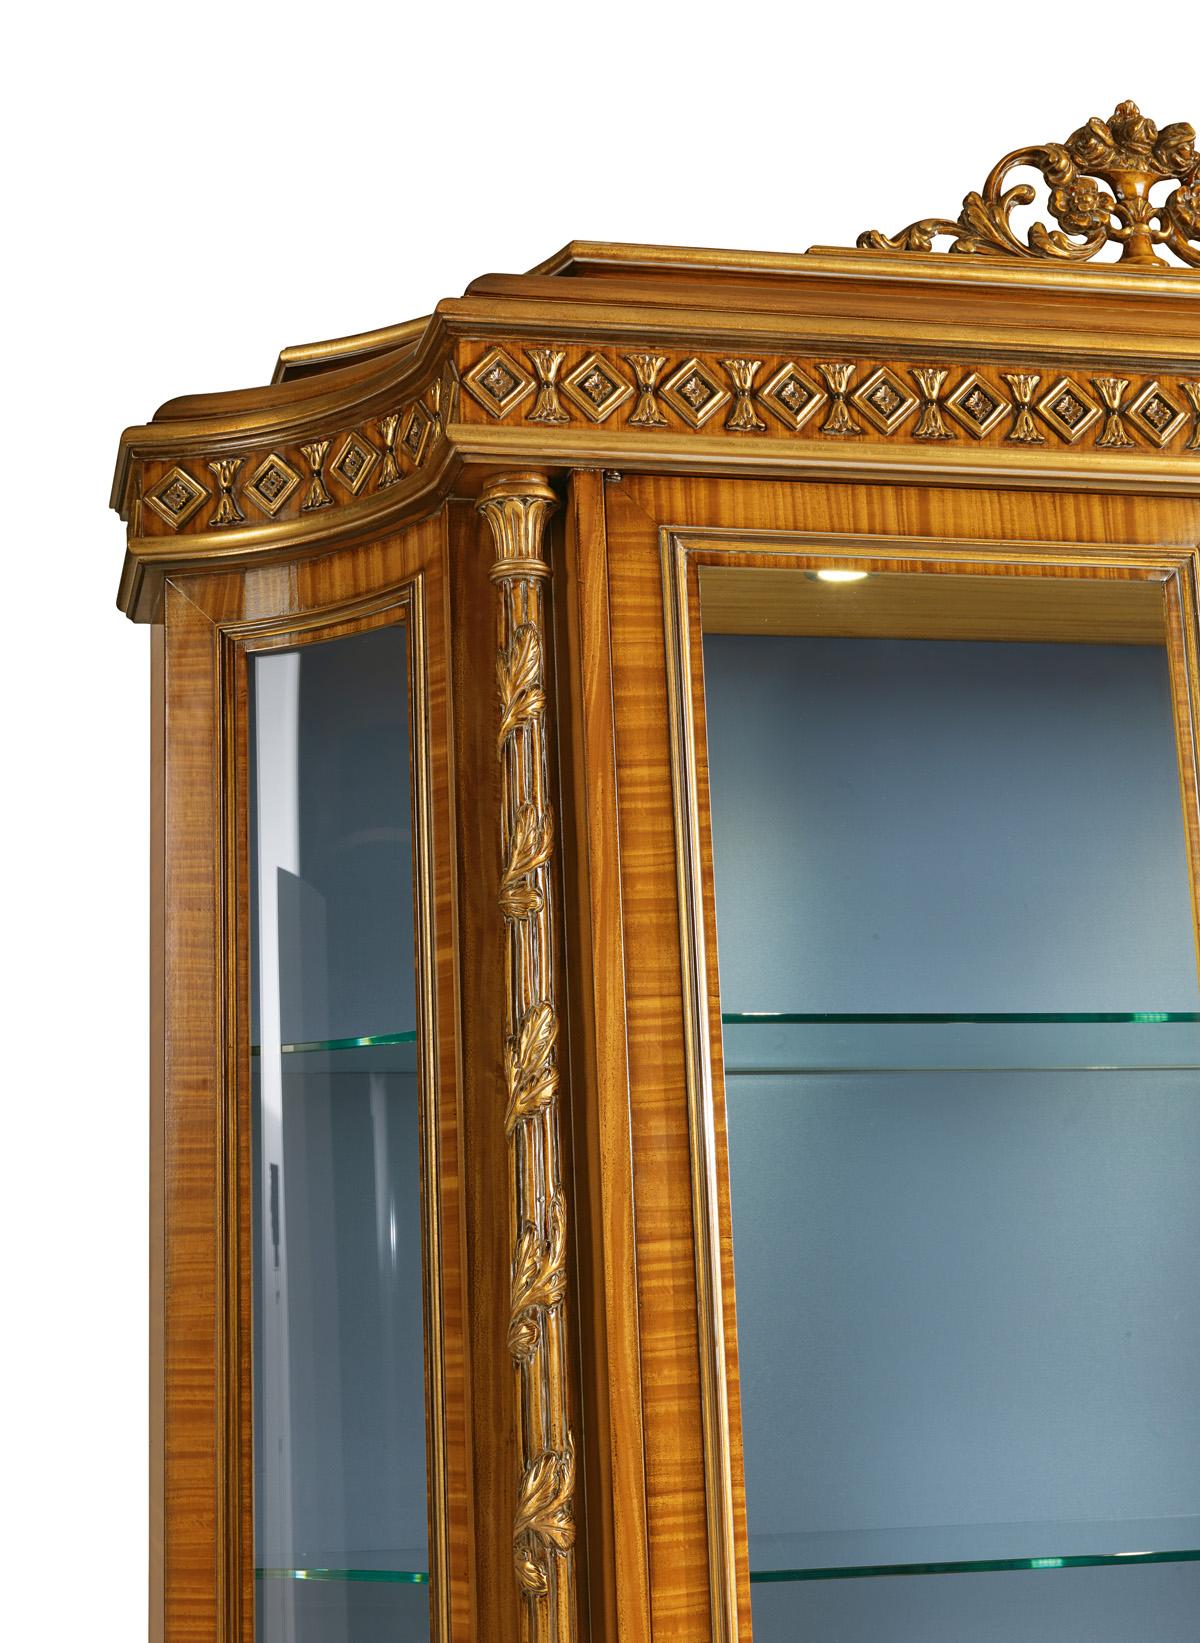 The B/5142 showcase with 2 doors is part of the new Classic collection by Zanaboni: veneered in citronnier and ebony woods, a real artwork, with details in mother of pearl and hand carved details.
The interior is covered in a blue satin fabric